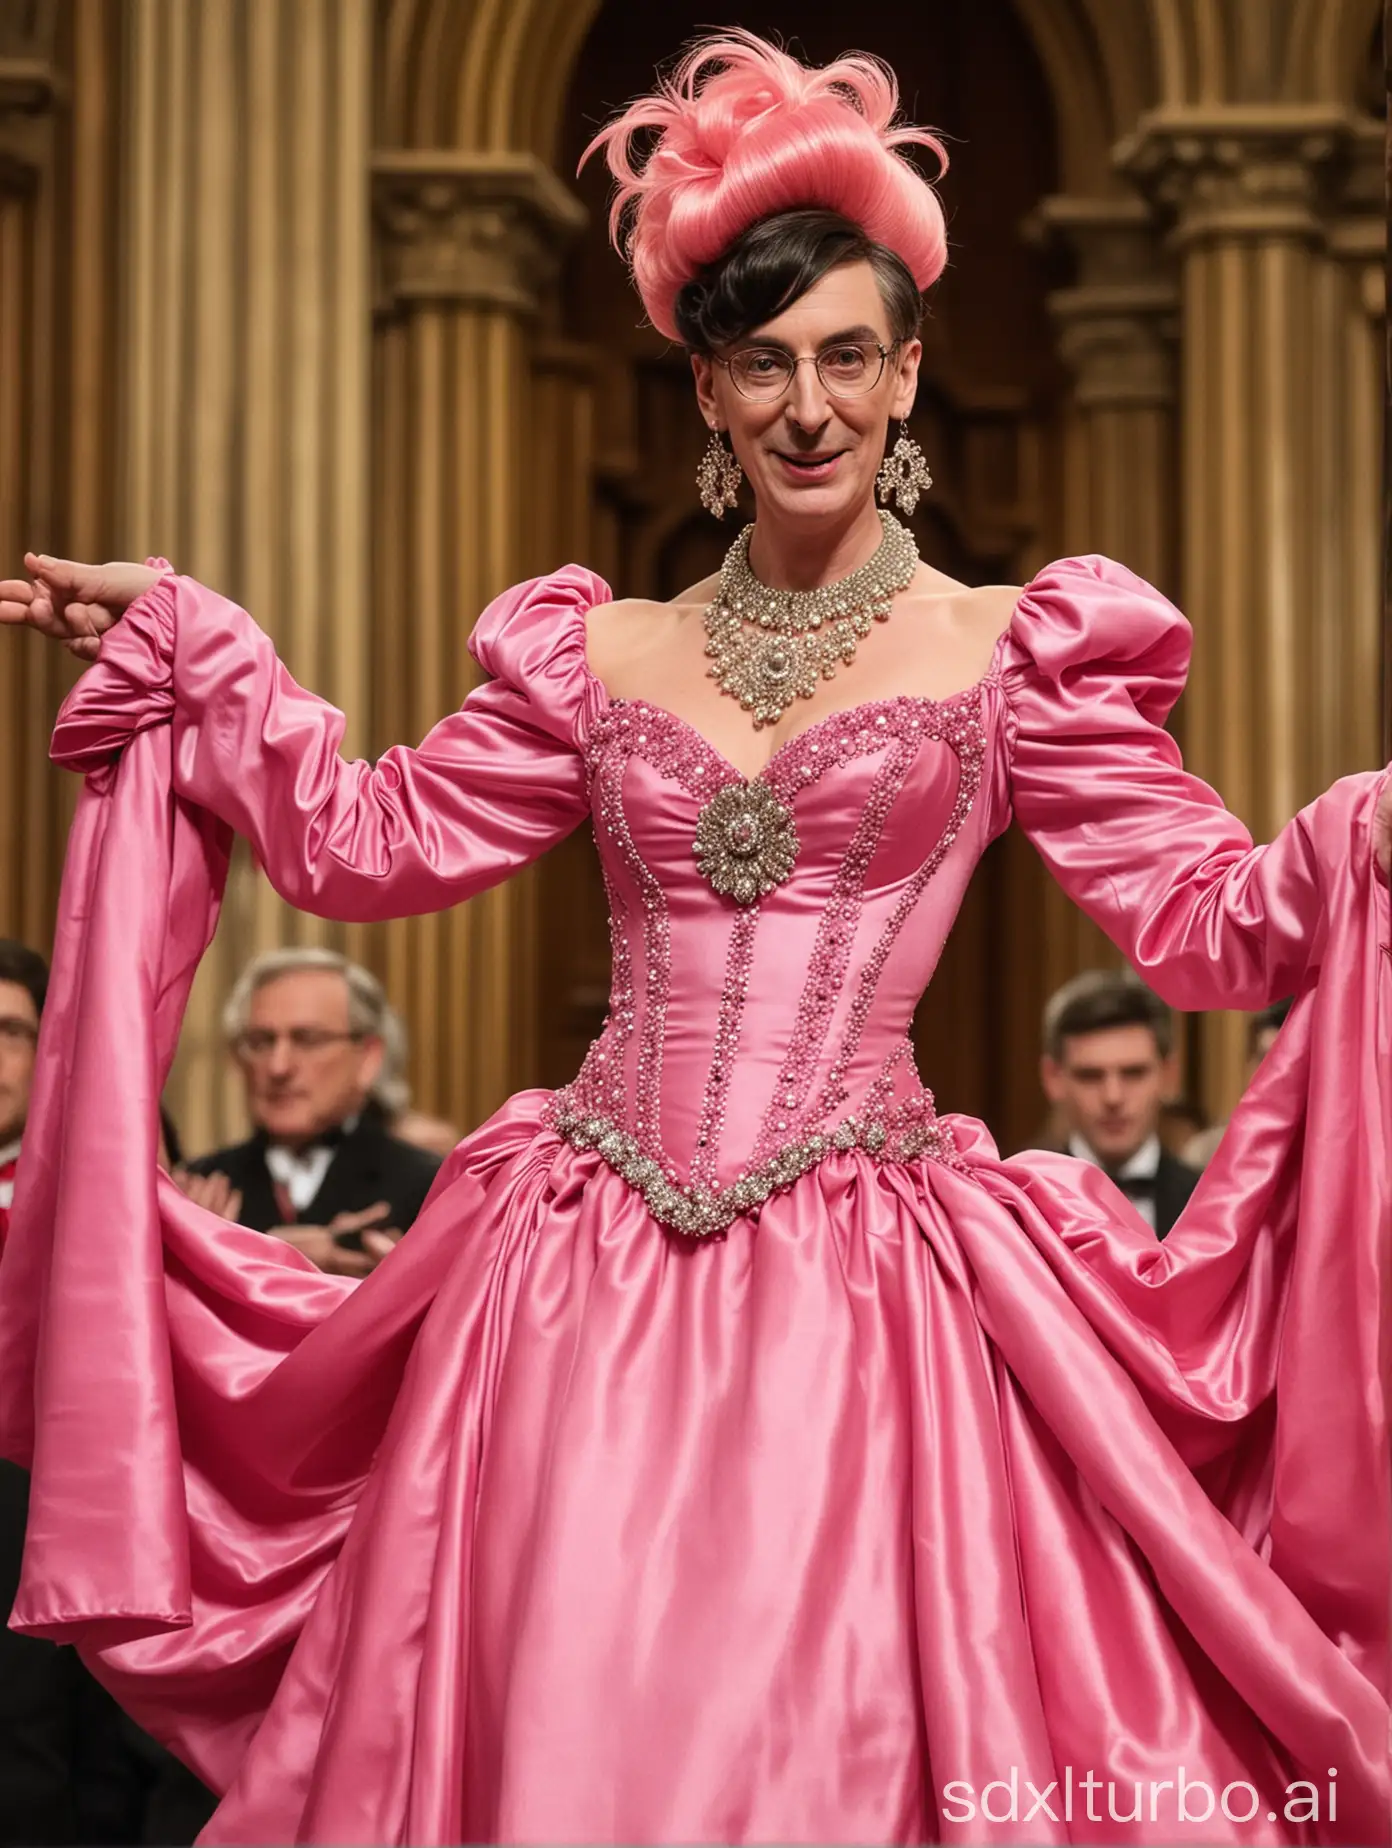 Jacob-ReesMogg-British-Politician-Dazzles-as-Flamboyant-Drag-Queen-on-Parliament-Stage